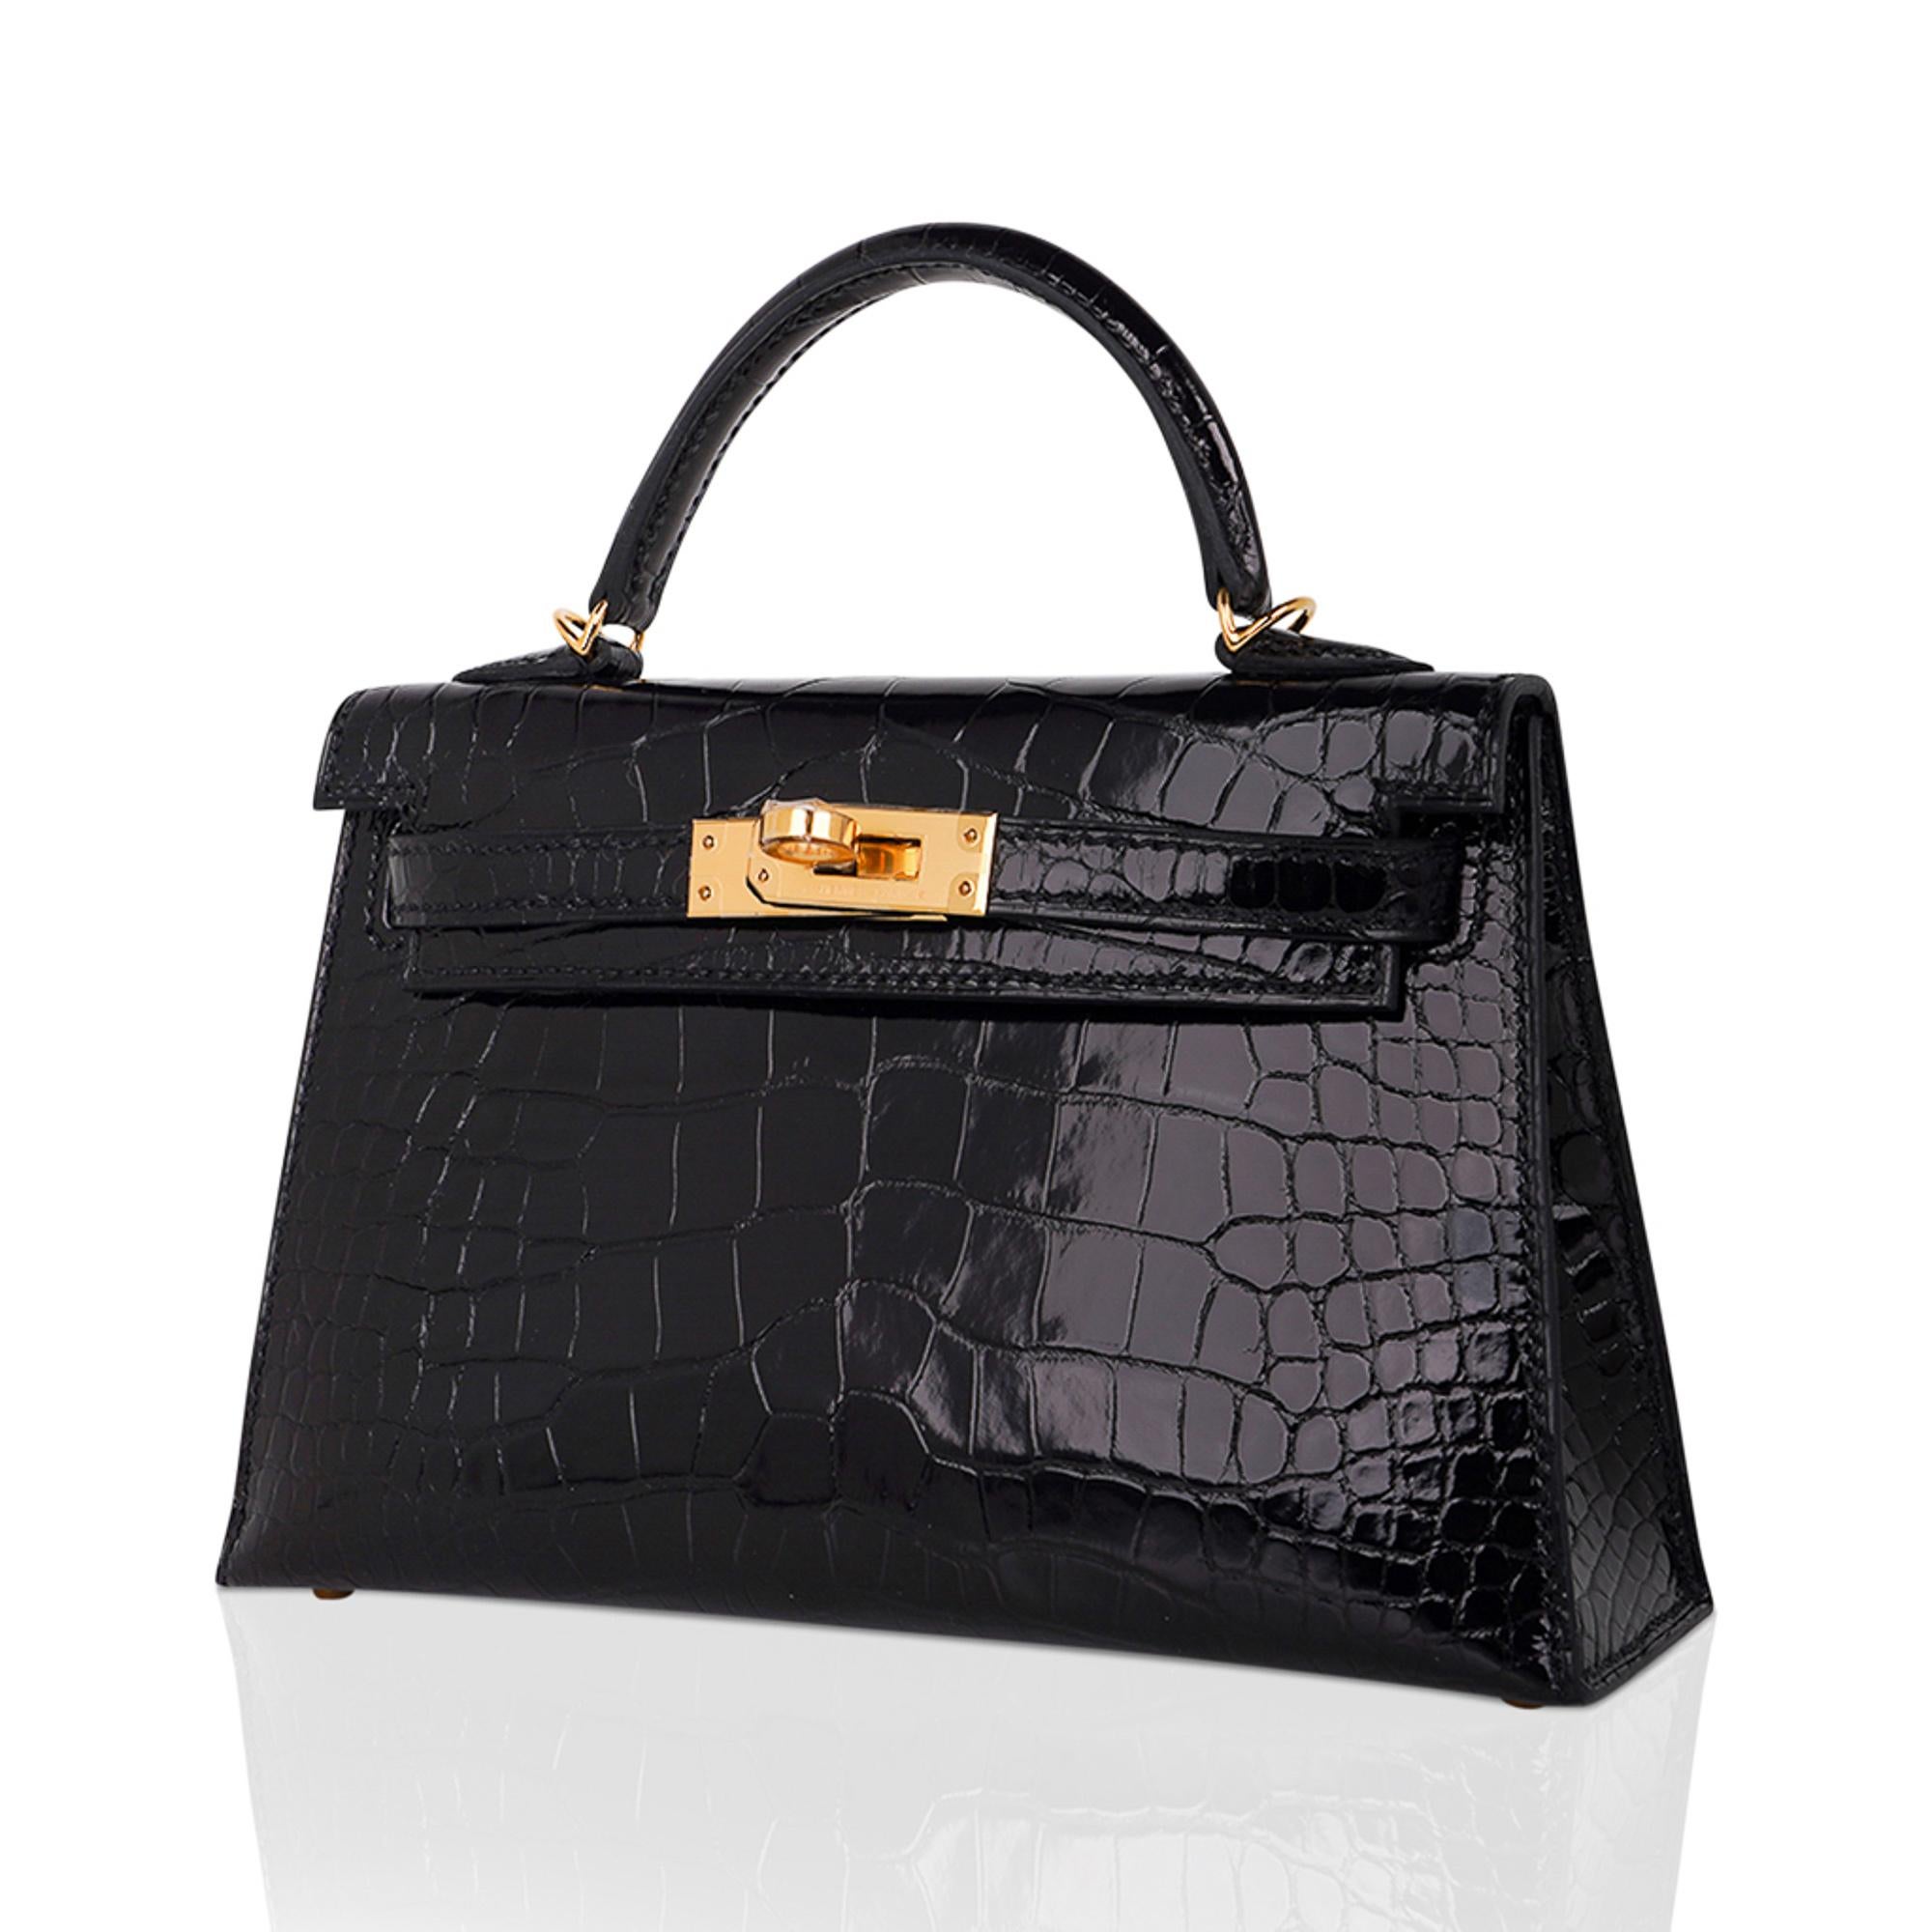 Mightychic offers an Hermes Kelly Mini 20 Sellier Bag featured in Black alligator.
Rich with gold hardware.
Carry by hand, shoulder or cross body.
The Kelly 20 bag in alligator is extremely limited and difficult to procure.
Comes with signature